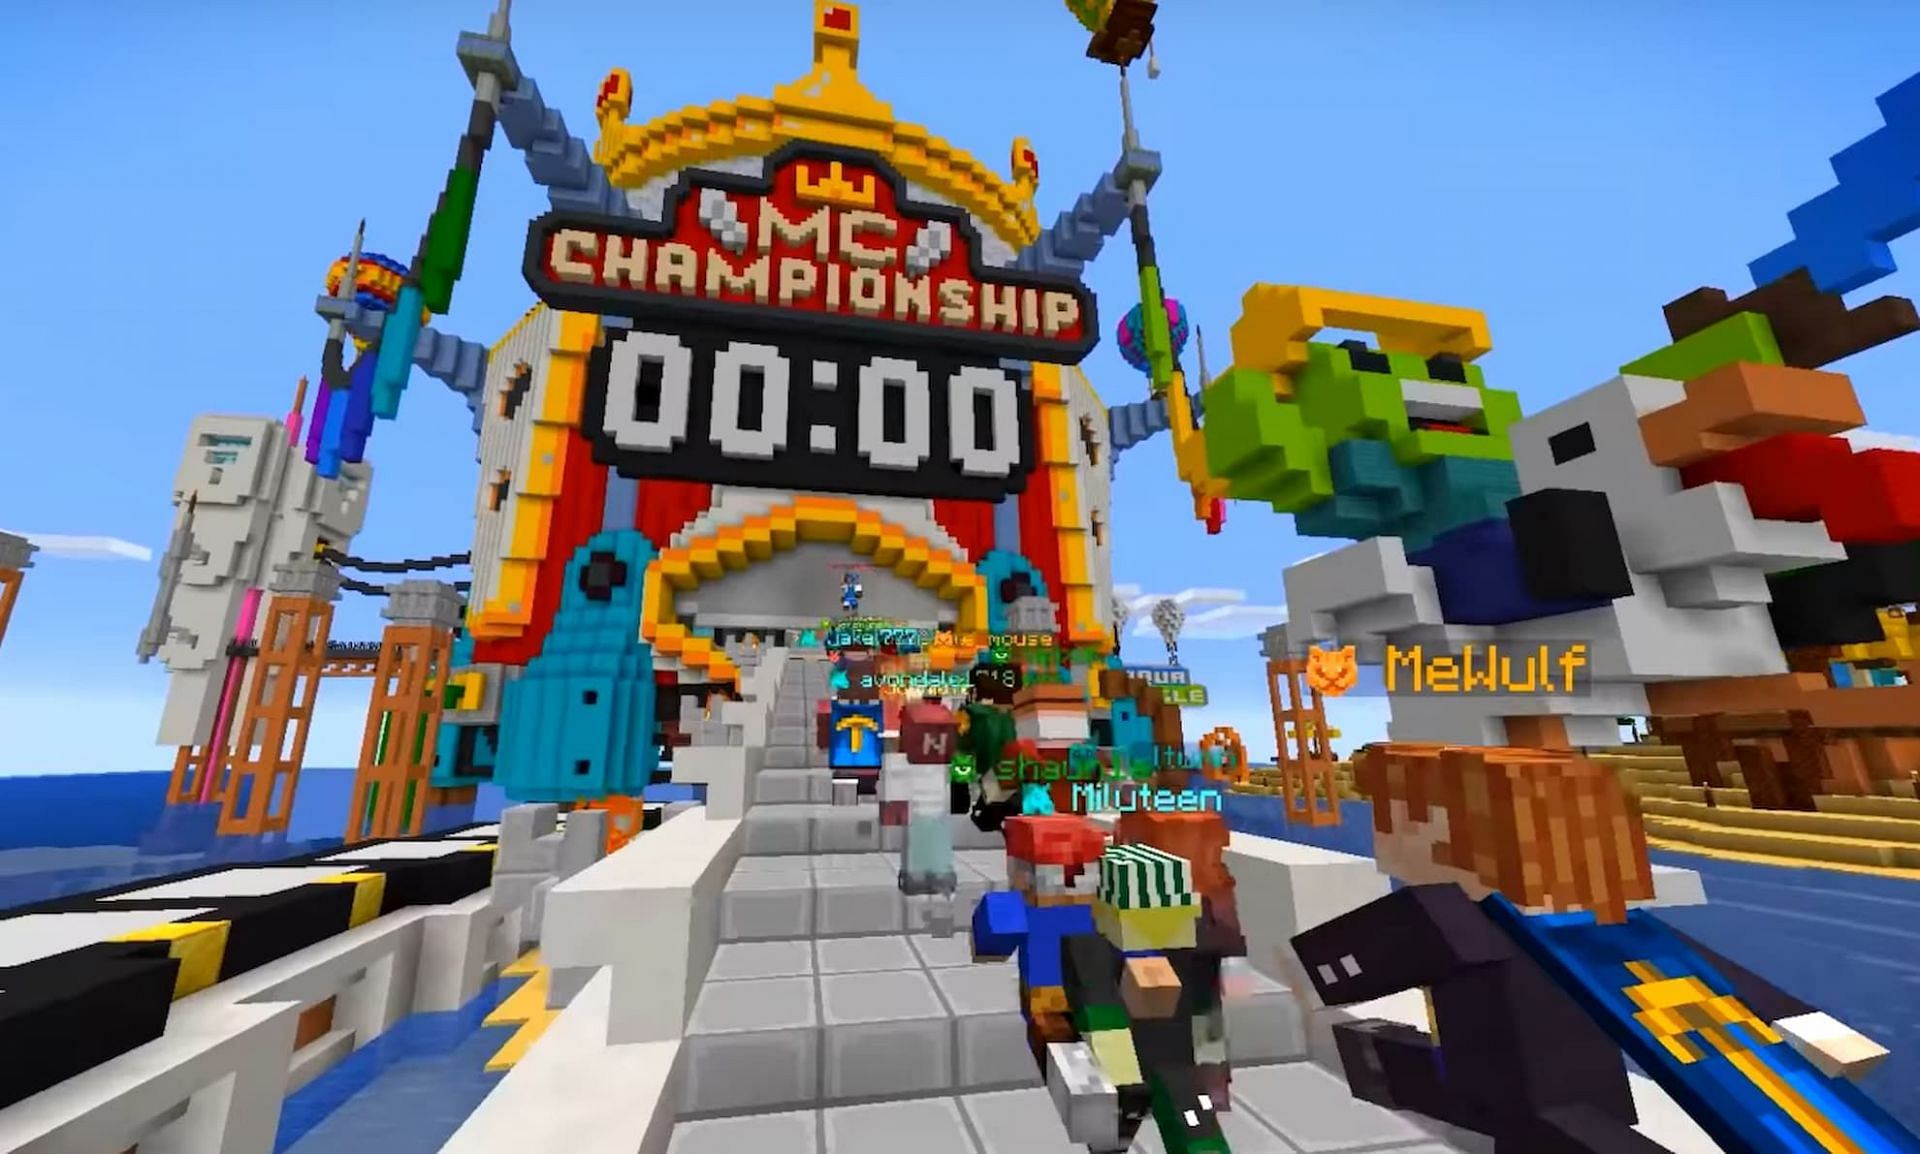 Minecraft Championship March 2022 Date, time, teams